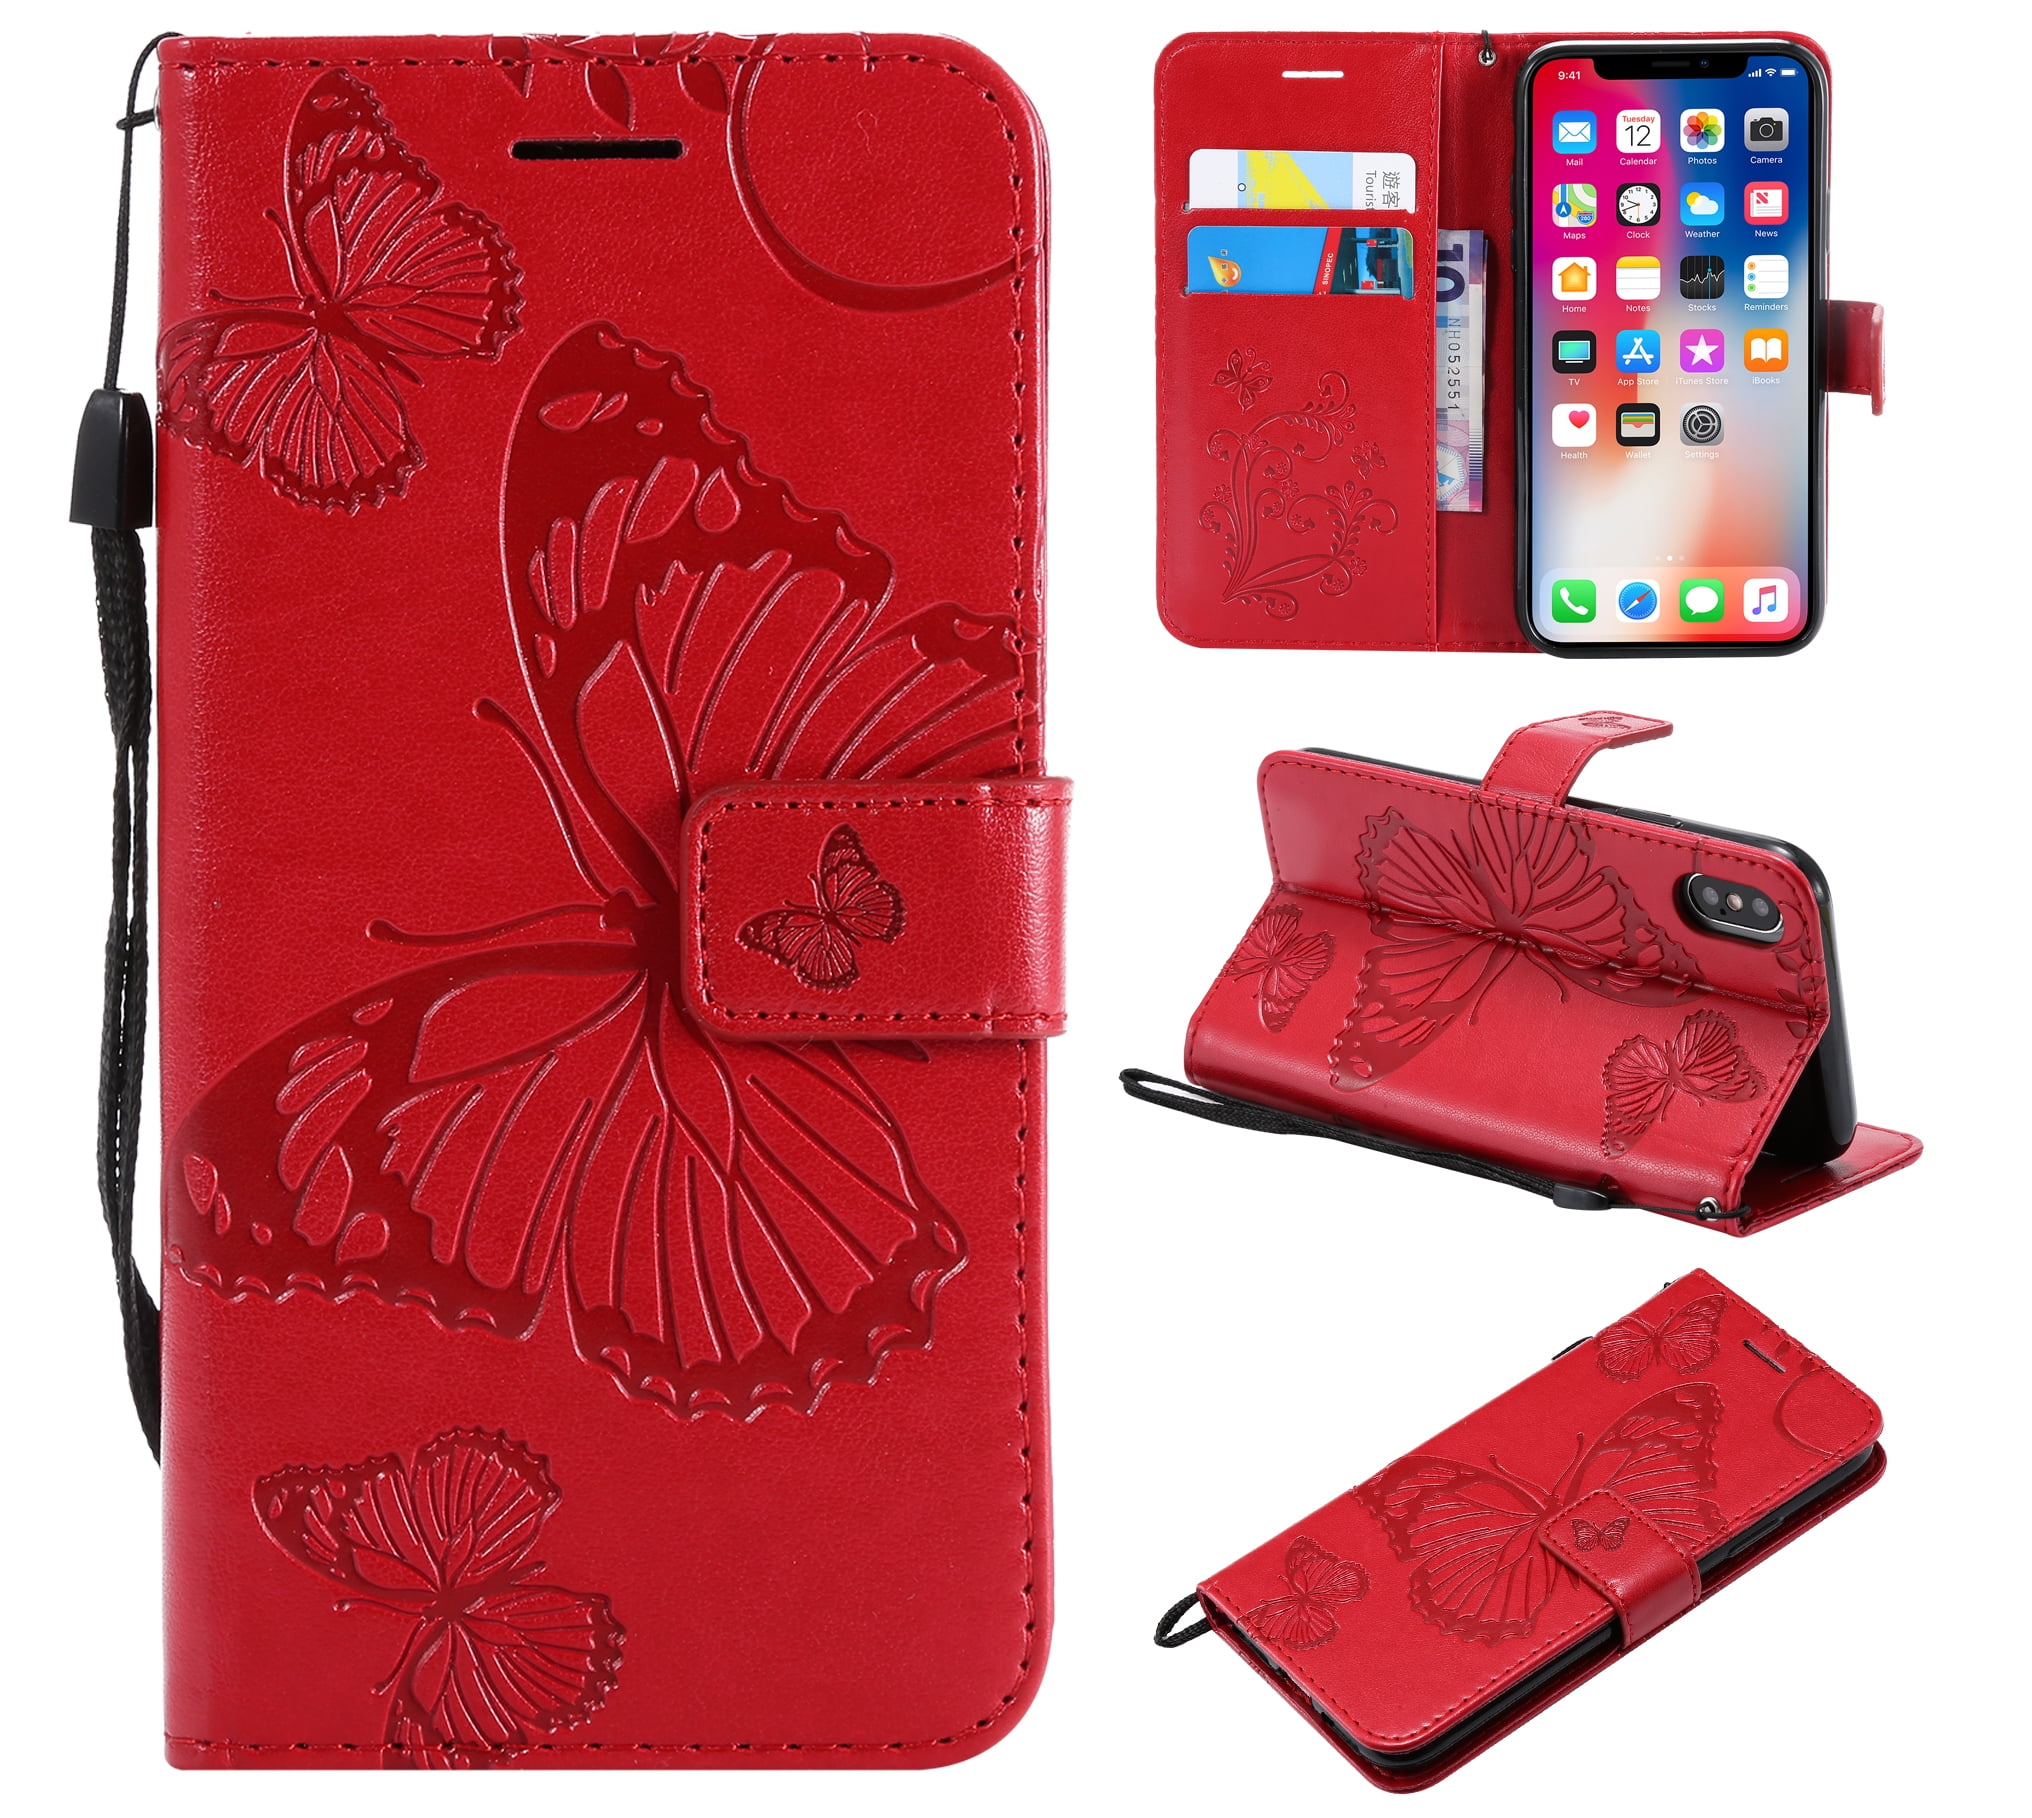 Herbests Compatible with iPhone 11 Pro Wallet Case Luxury Bling Diamond Mandala Flower Pressed Case with Stand Flip Folio PU Leather Shockproof Cover Magnetic Wrist Strap,Red